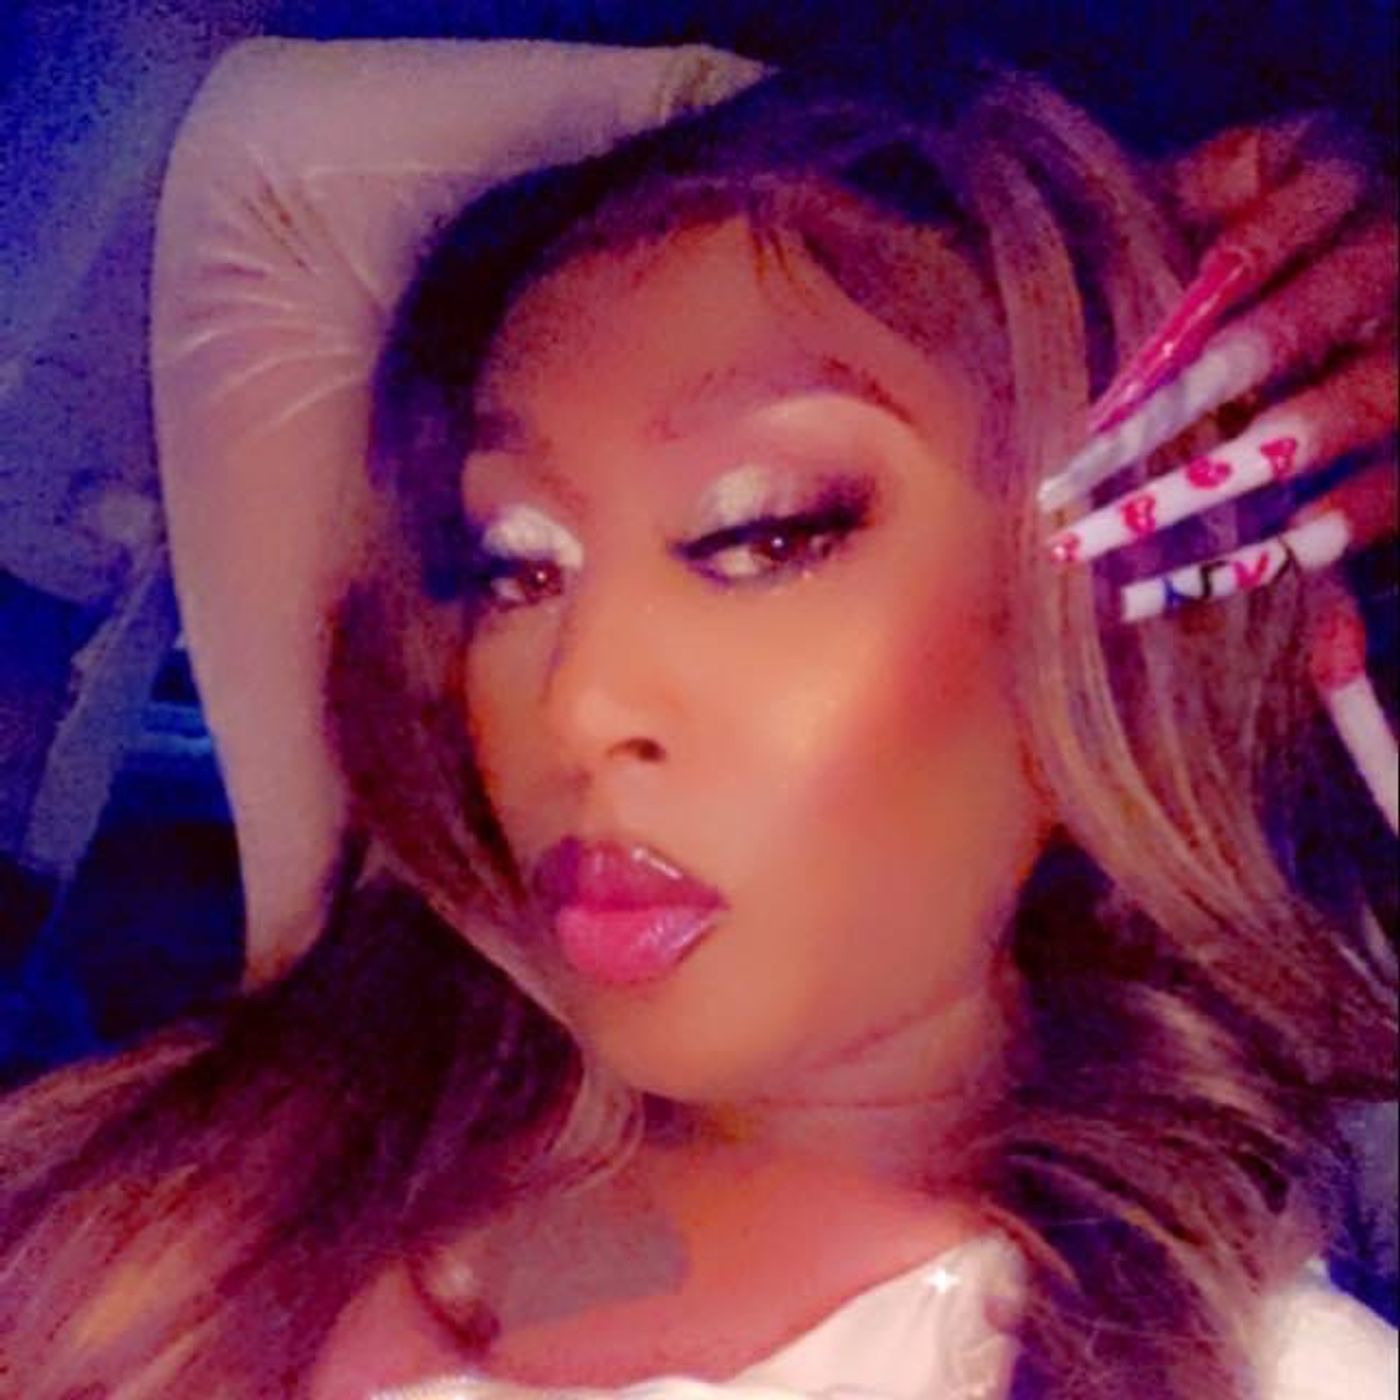 The MS. TOXIQ interview:  Transgender, Cook County jail, Lil Jay, dating gay men + more